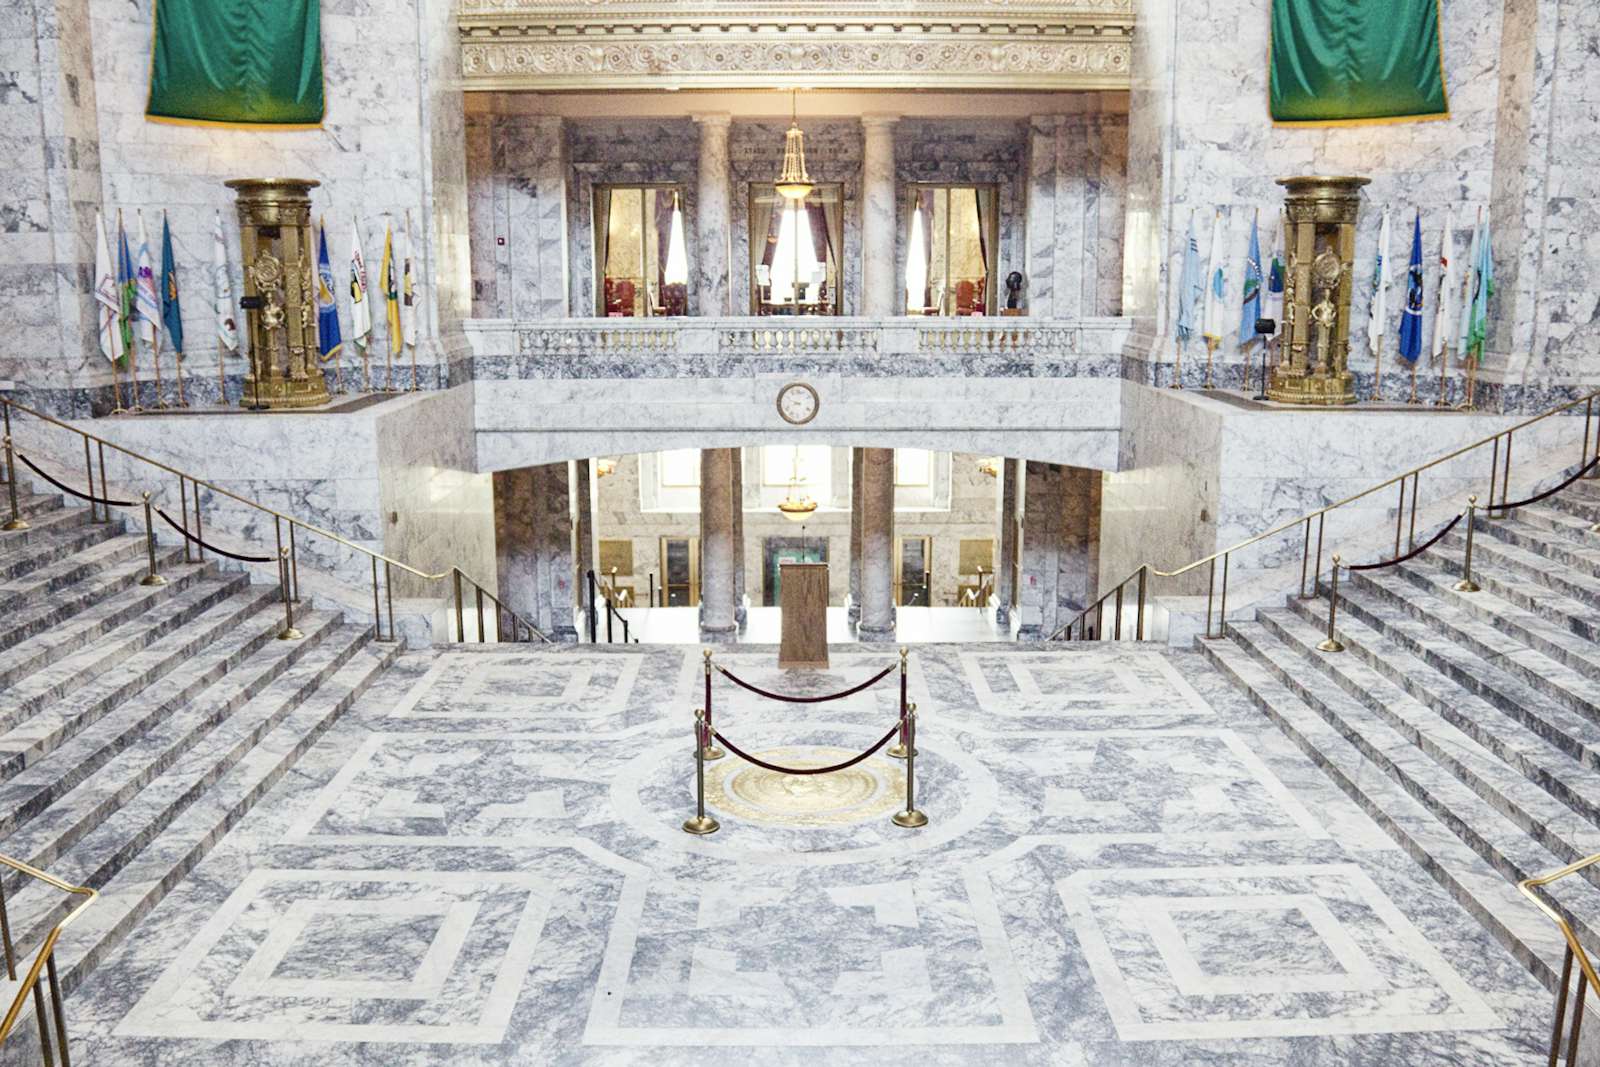 State Capitol Building in Olympia, Washington